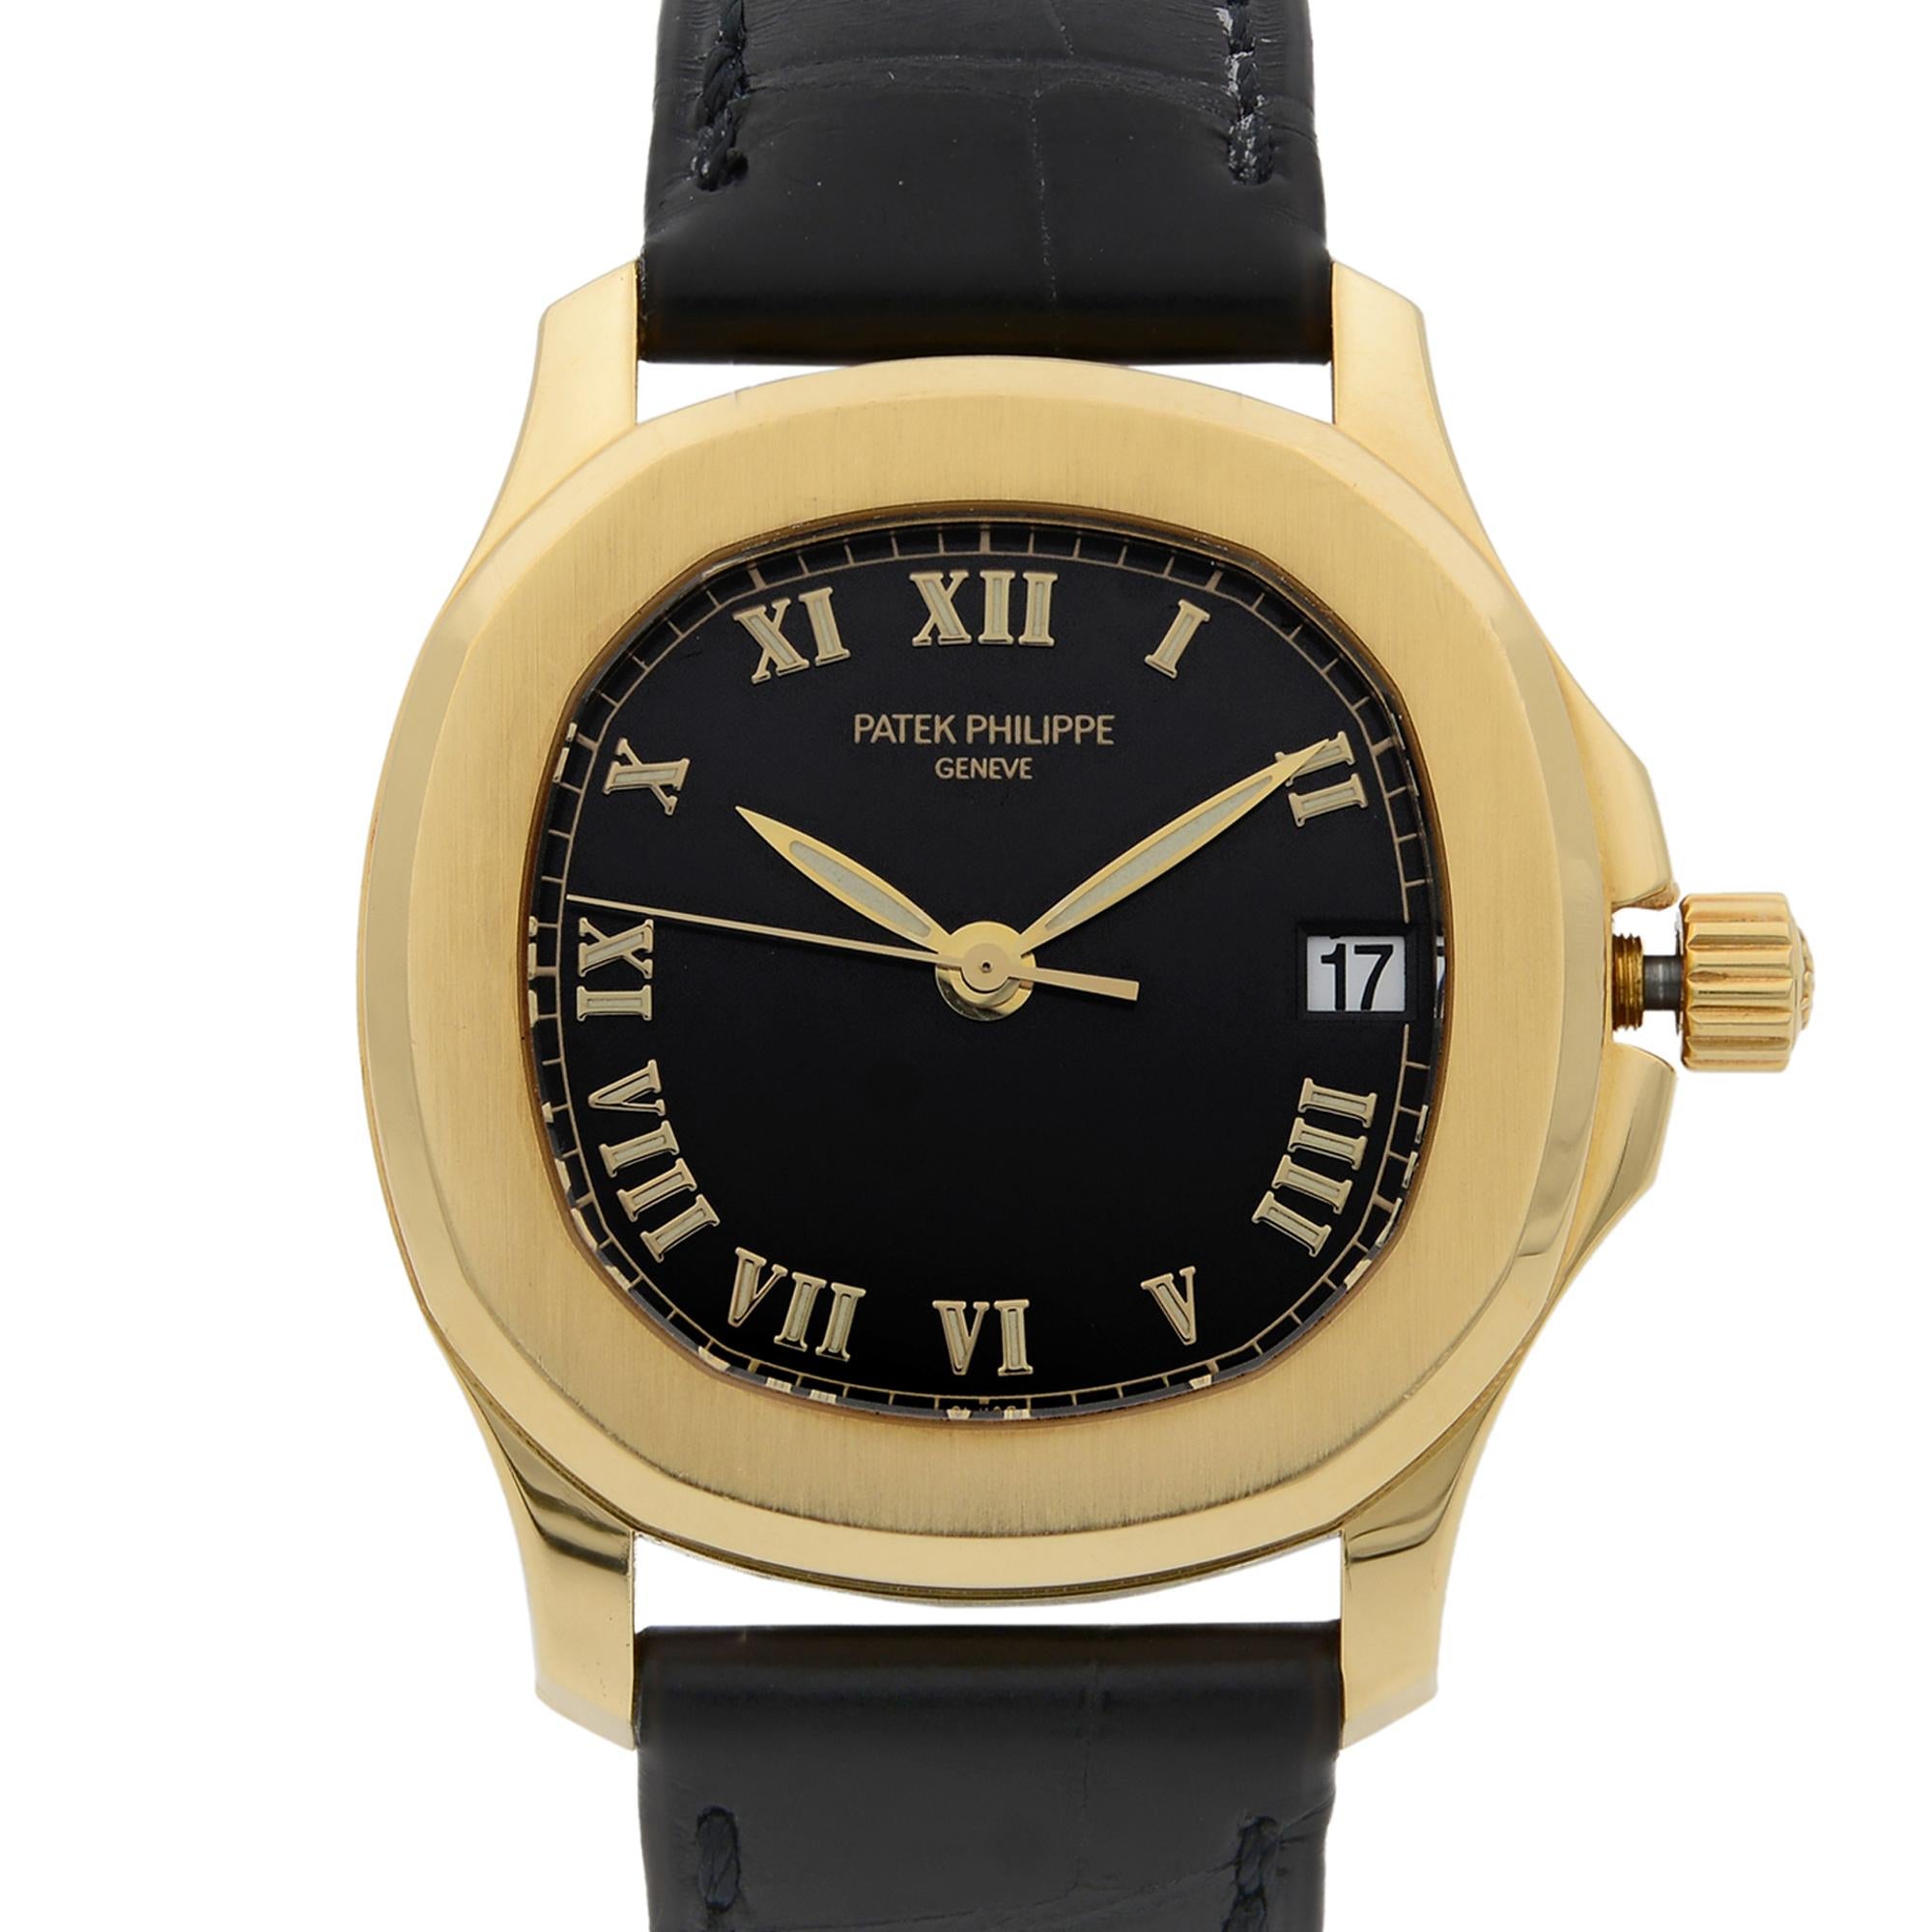 This pre-owned Patek Philippe Aquanat 5060J-001 is a beautiful men's timepiece that is powered by mechanical (automatic) movement which is cased in a yellow gold case. It has a round shape face, date indicator dial and has hand roman numerals style